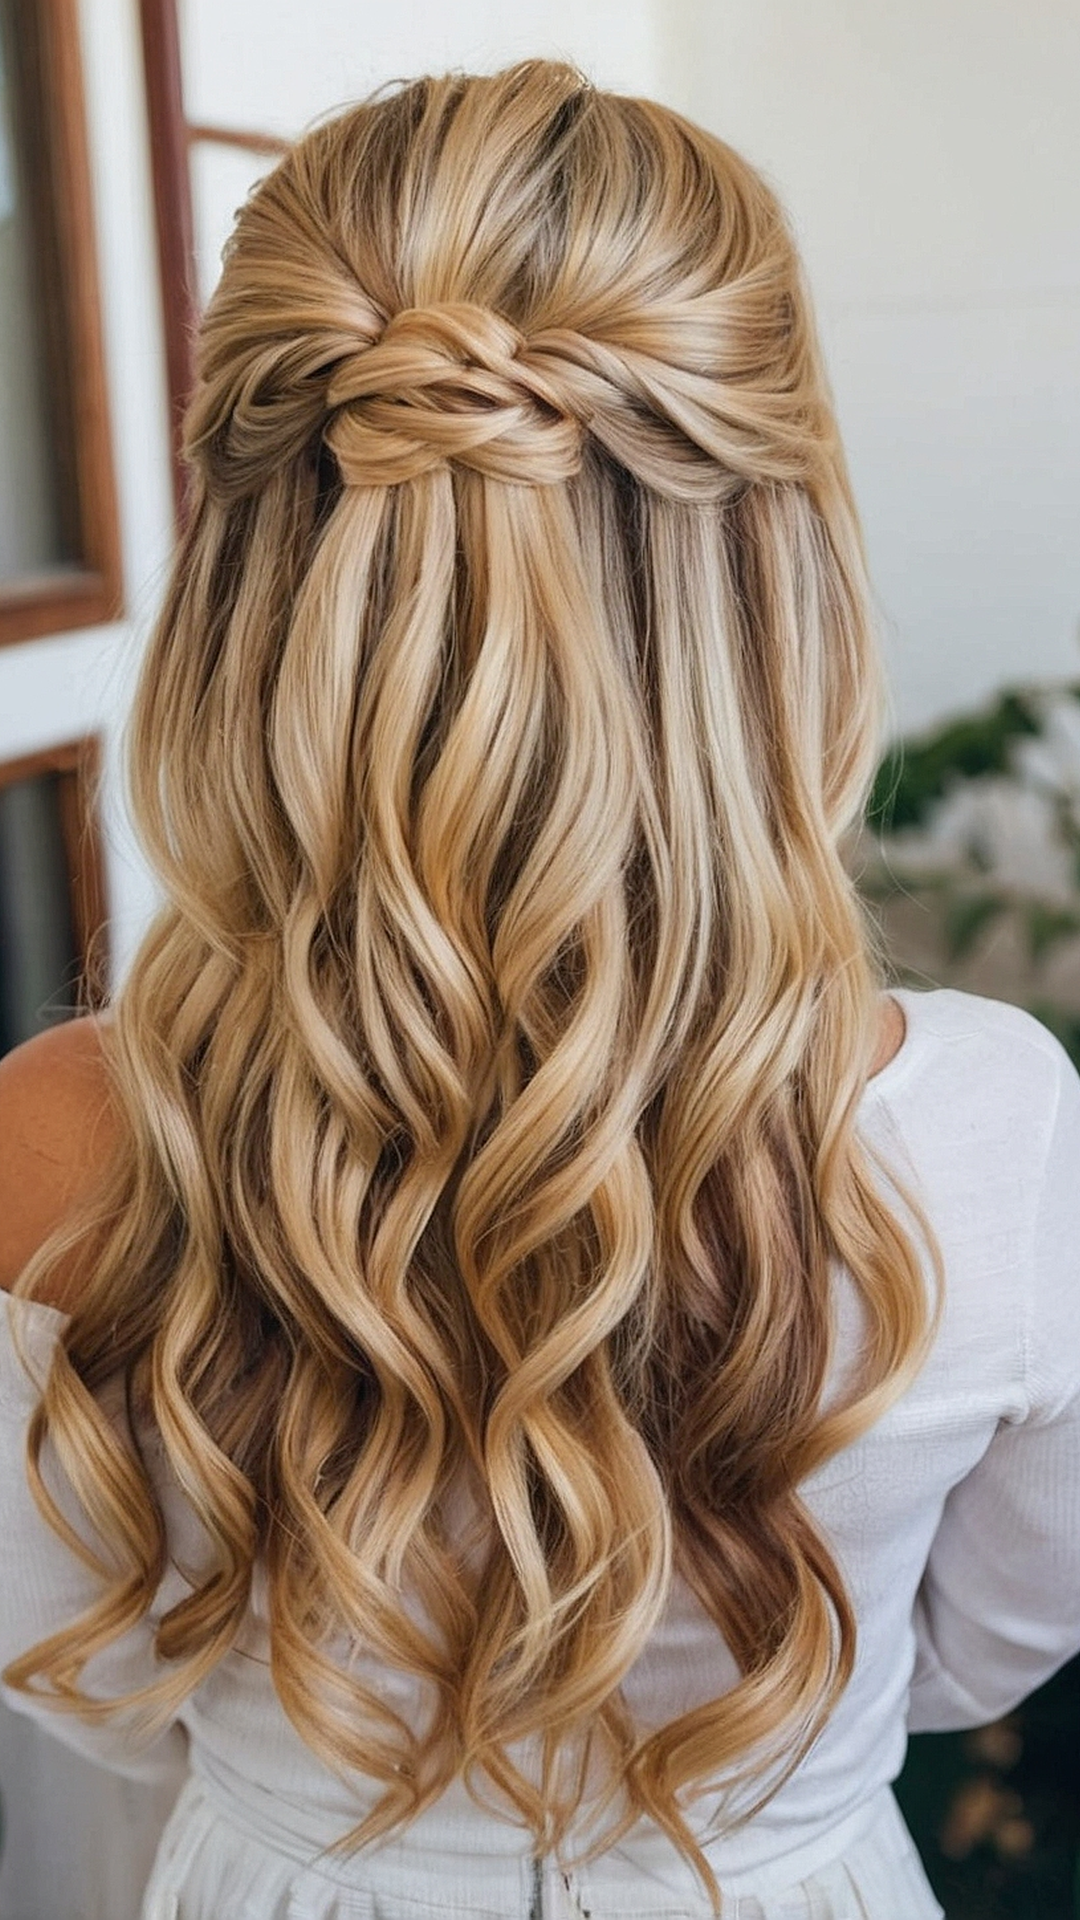 Stunning Half Up Half Down Prom Hairstyles Guide